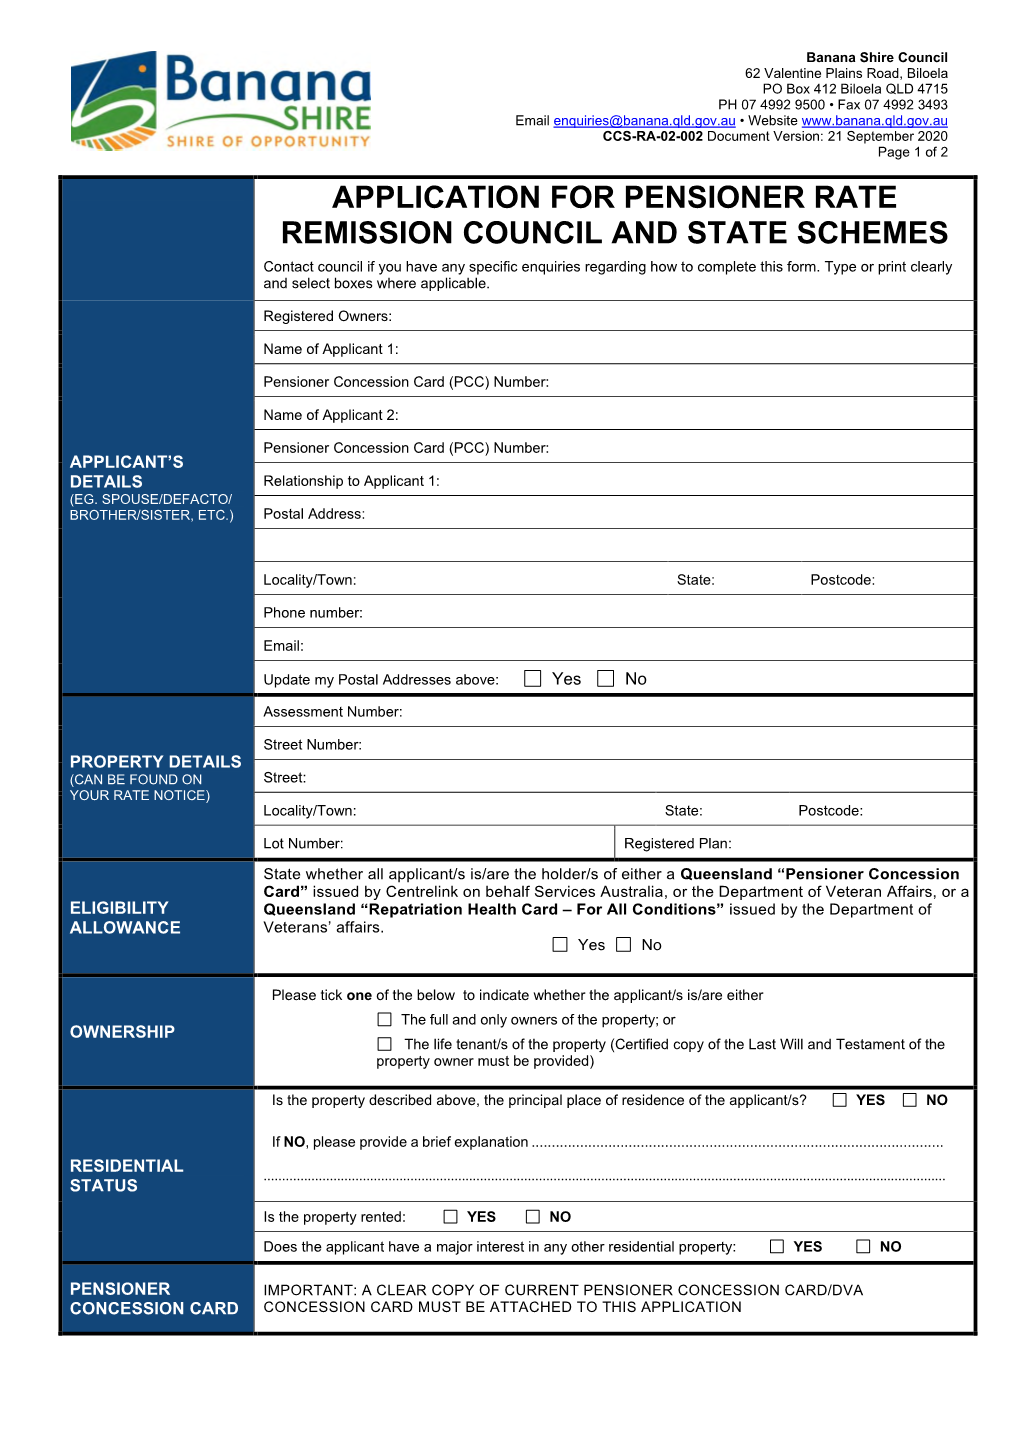 APPLICATION for PENSIONER RATE REMISSION COUNCIL and STATE SCHEMES Contact Council If You Have Any Specific Enquiries Regarding How to Complete This Form